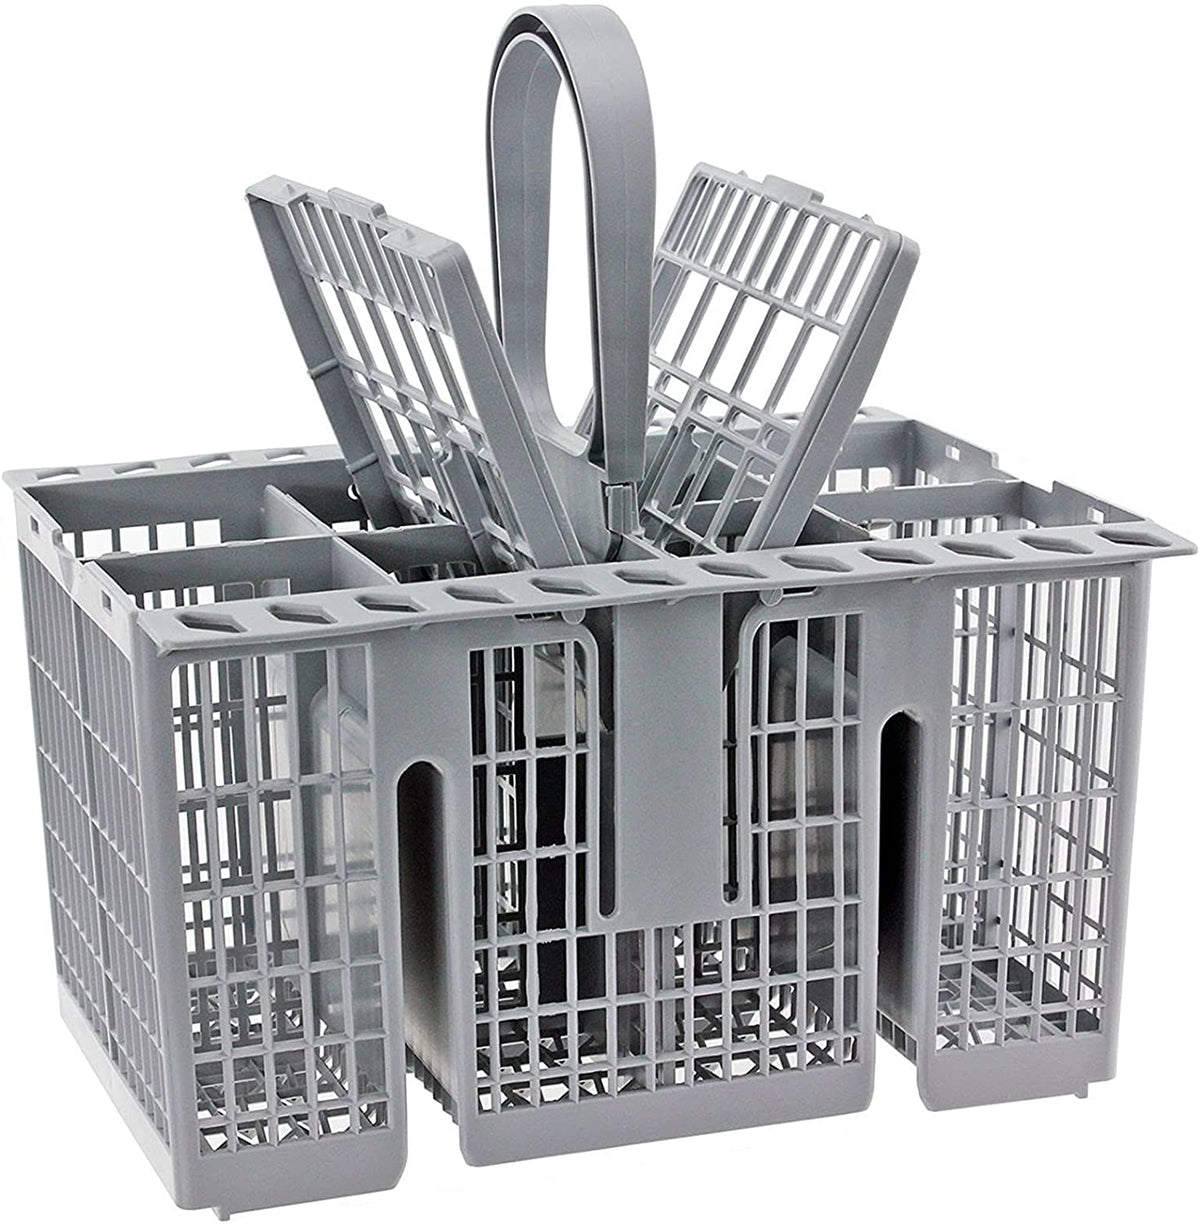 Dishwasher Cutlery Basket for Hotpoint Universal Removable Handle Grey  220mm 5056026713108